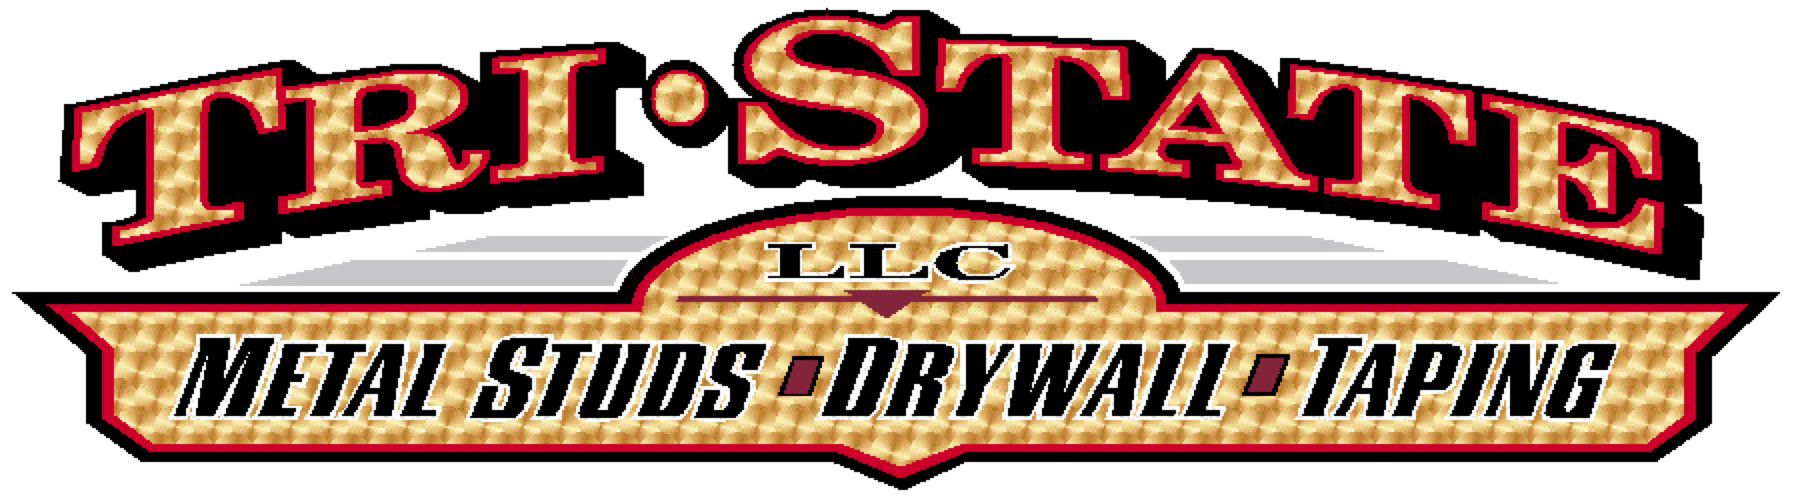 Tri-State Logo - Tri-State Construction – Metal Stud Framing, Drywall, and Taping